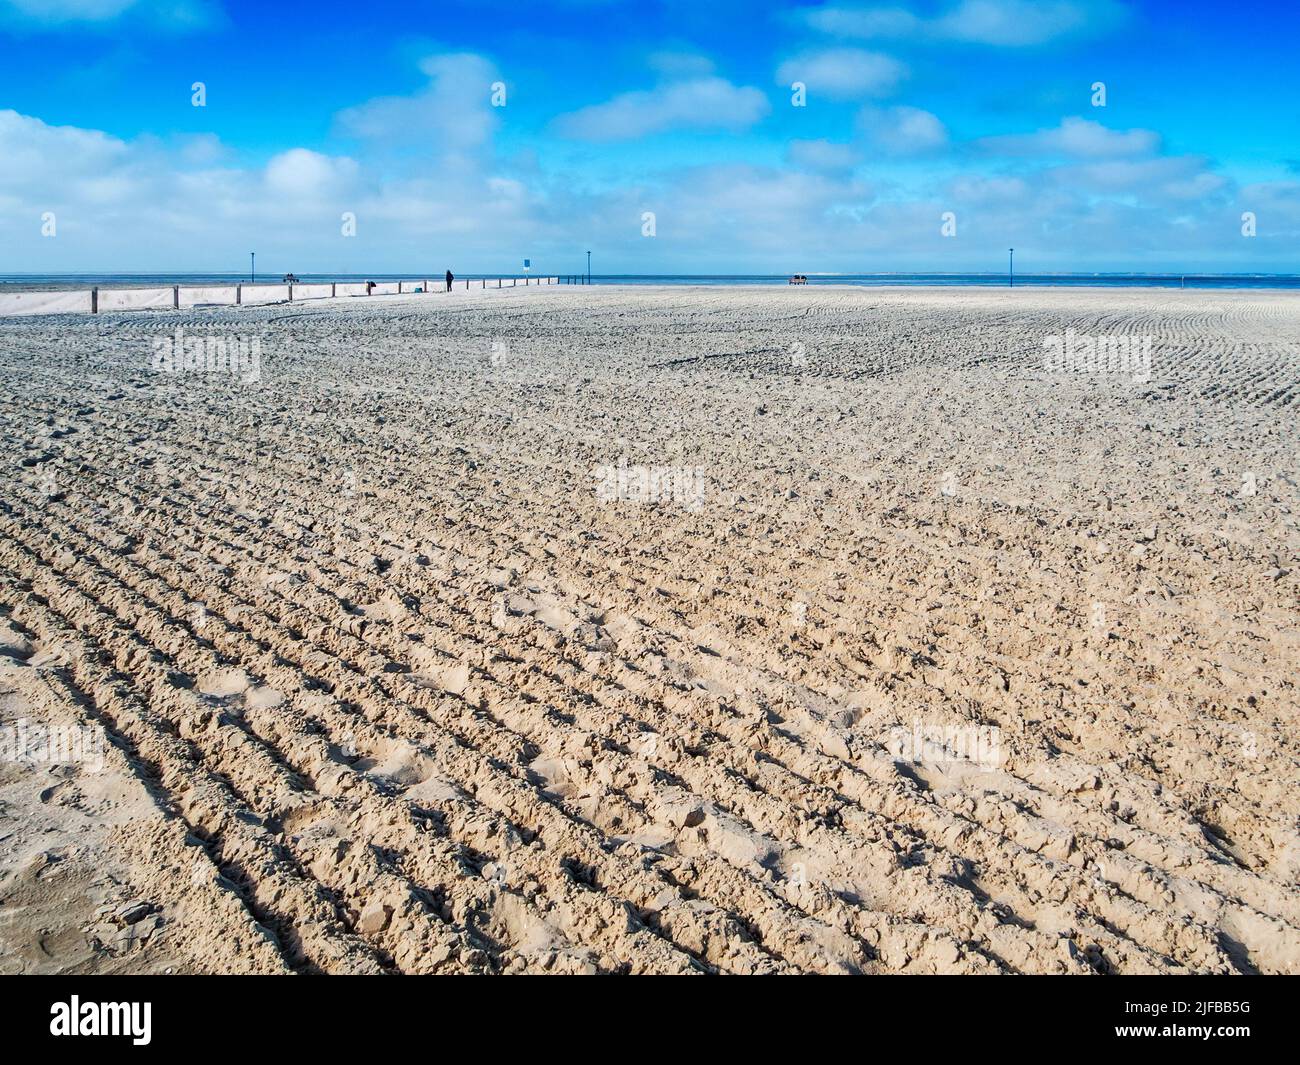 Landscape view of the German North Sea beach near Neuharlingersiel with a freshly smoothed empty sunbathing beach in front of a blue sky. Stock Photo